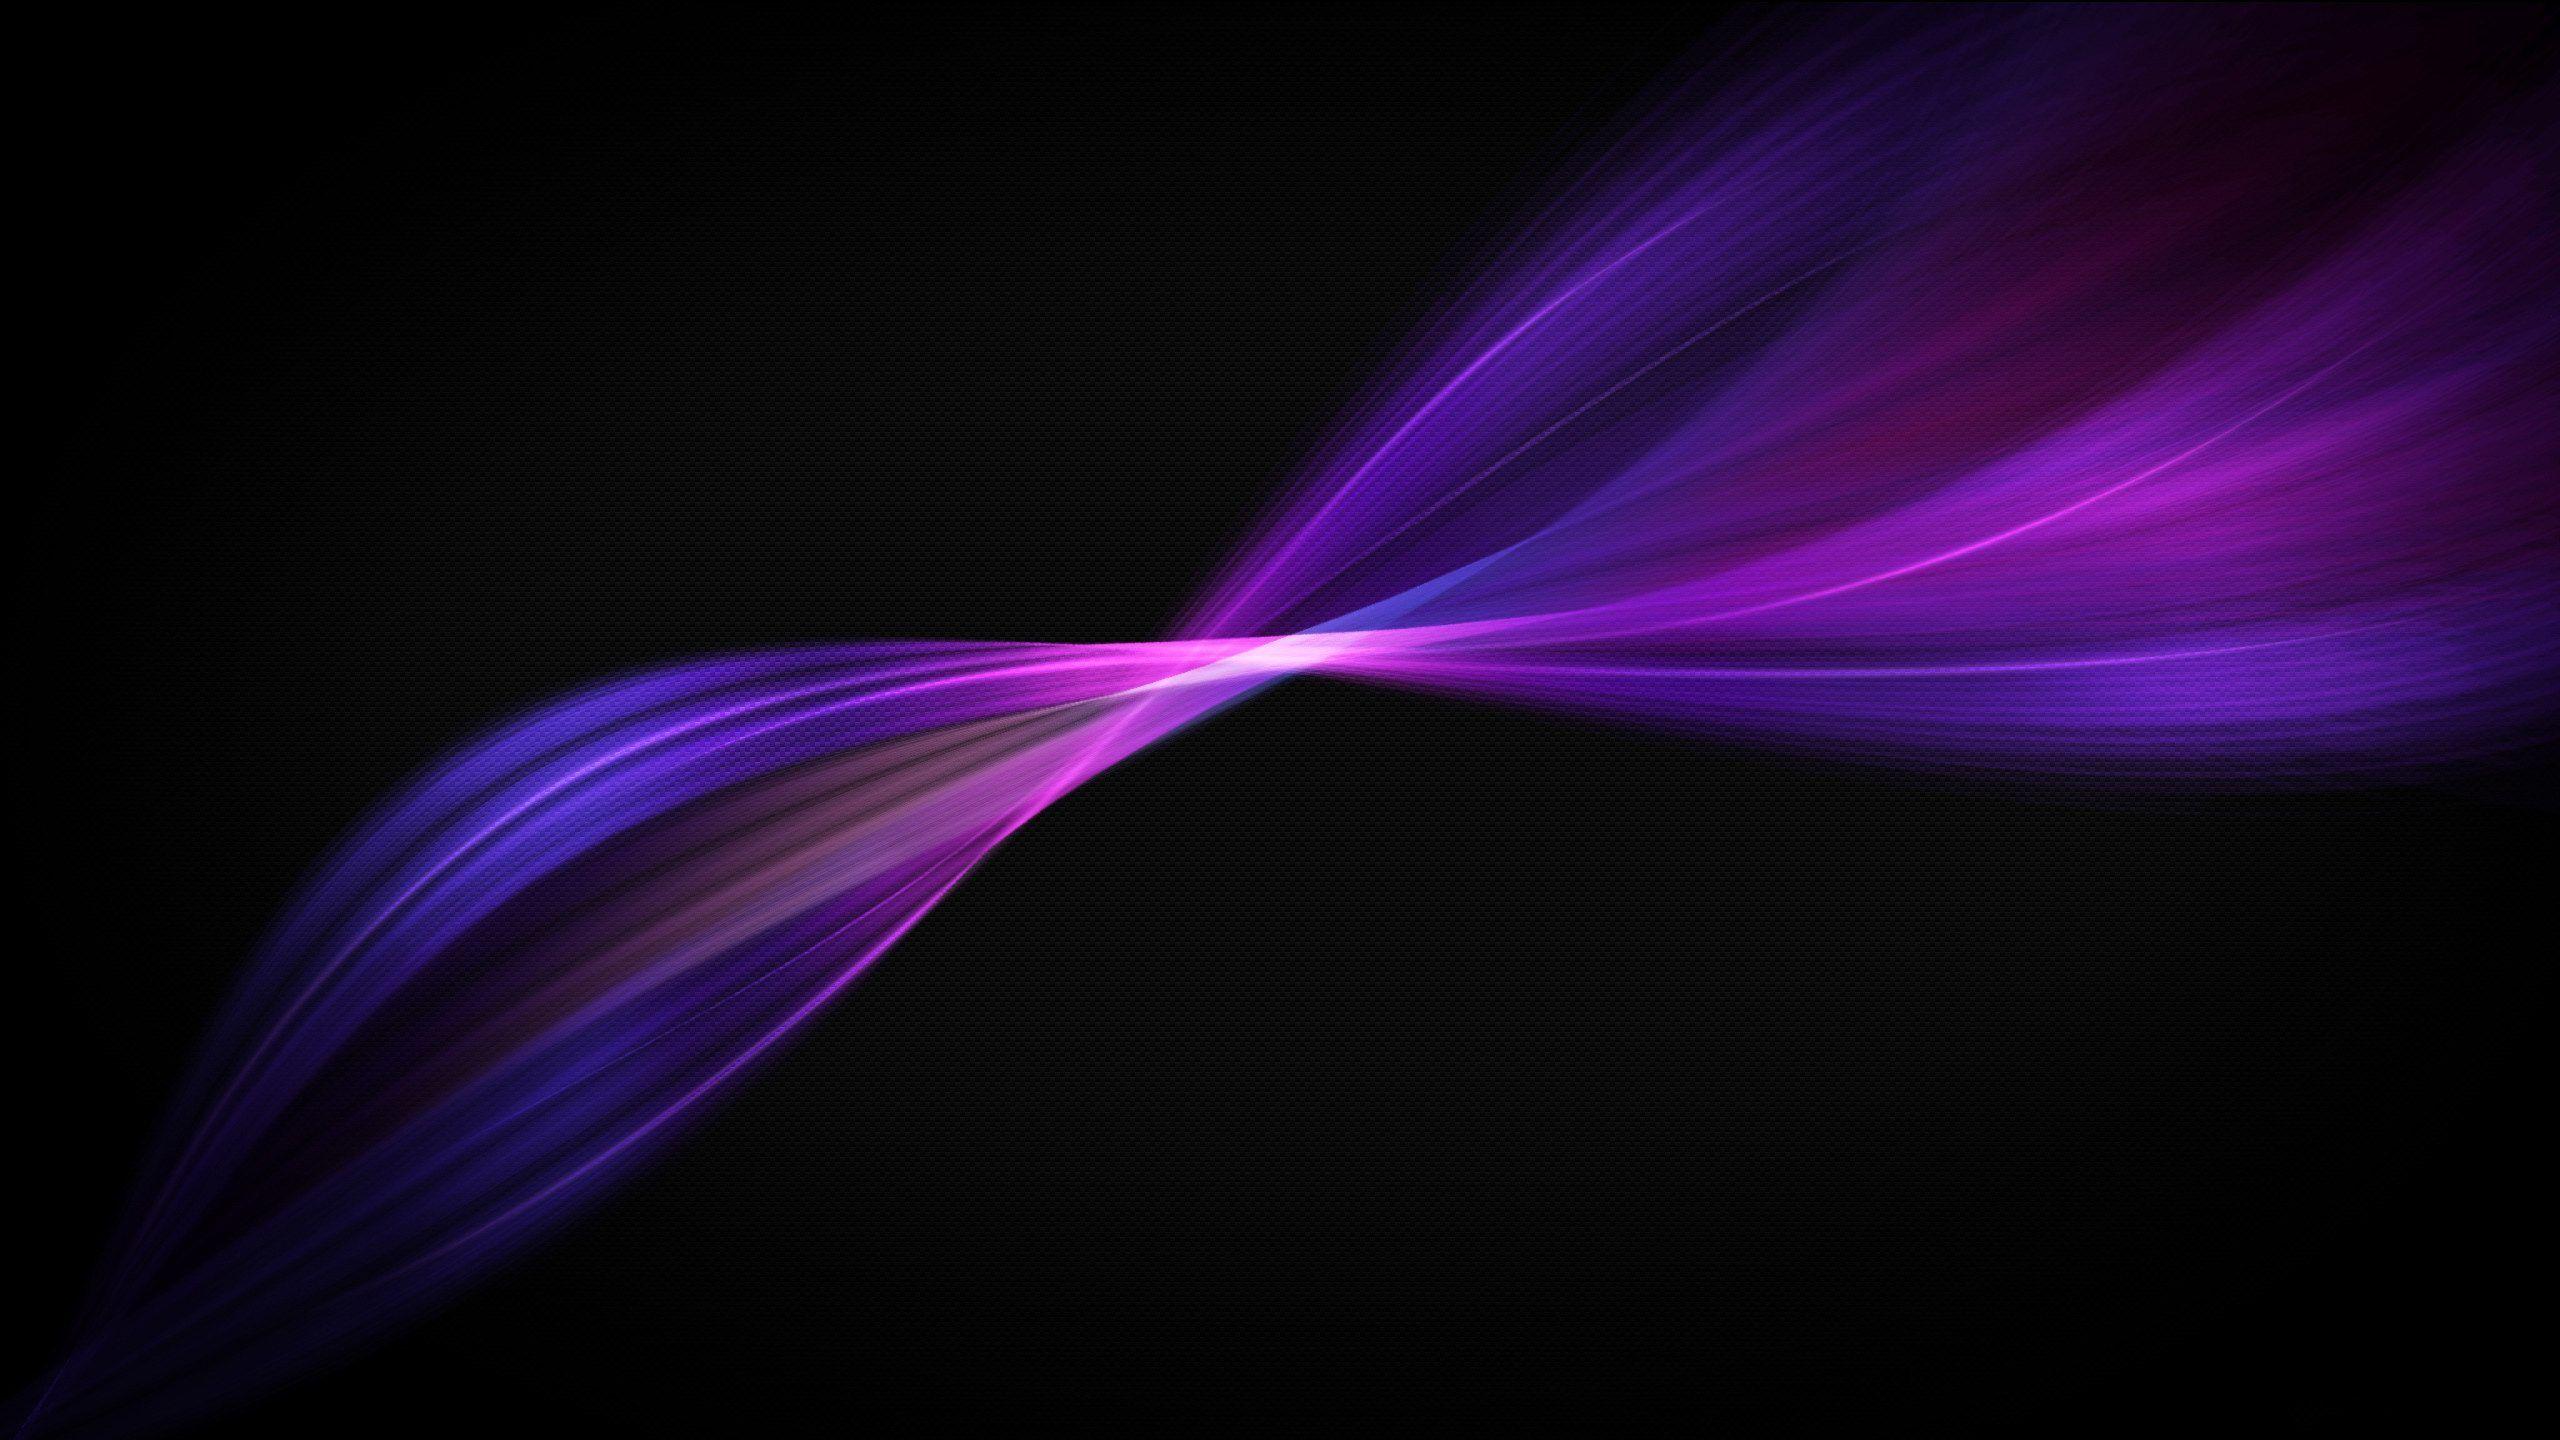 Wallpapers For > Purple And Black Backgrounds Wallpapers